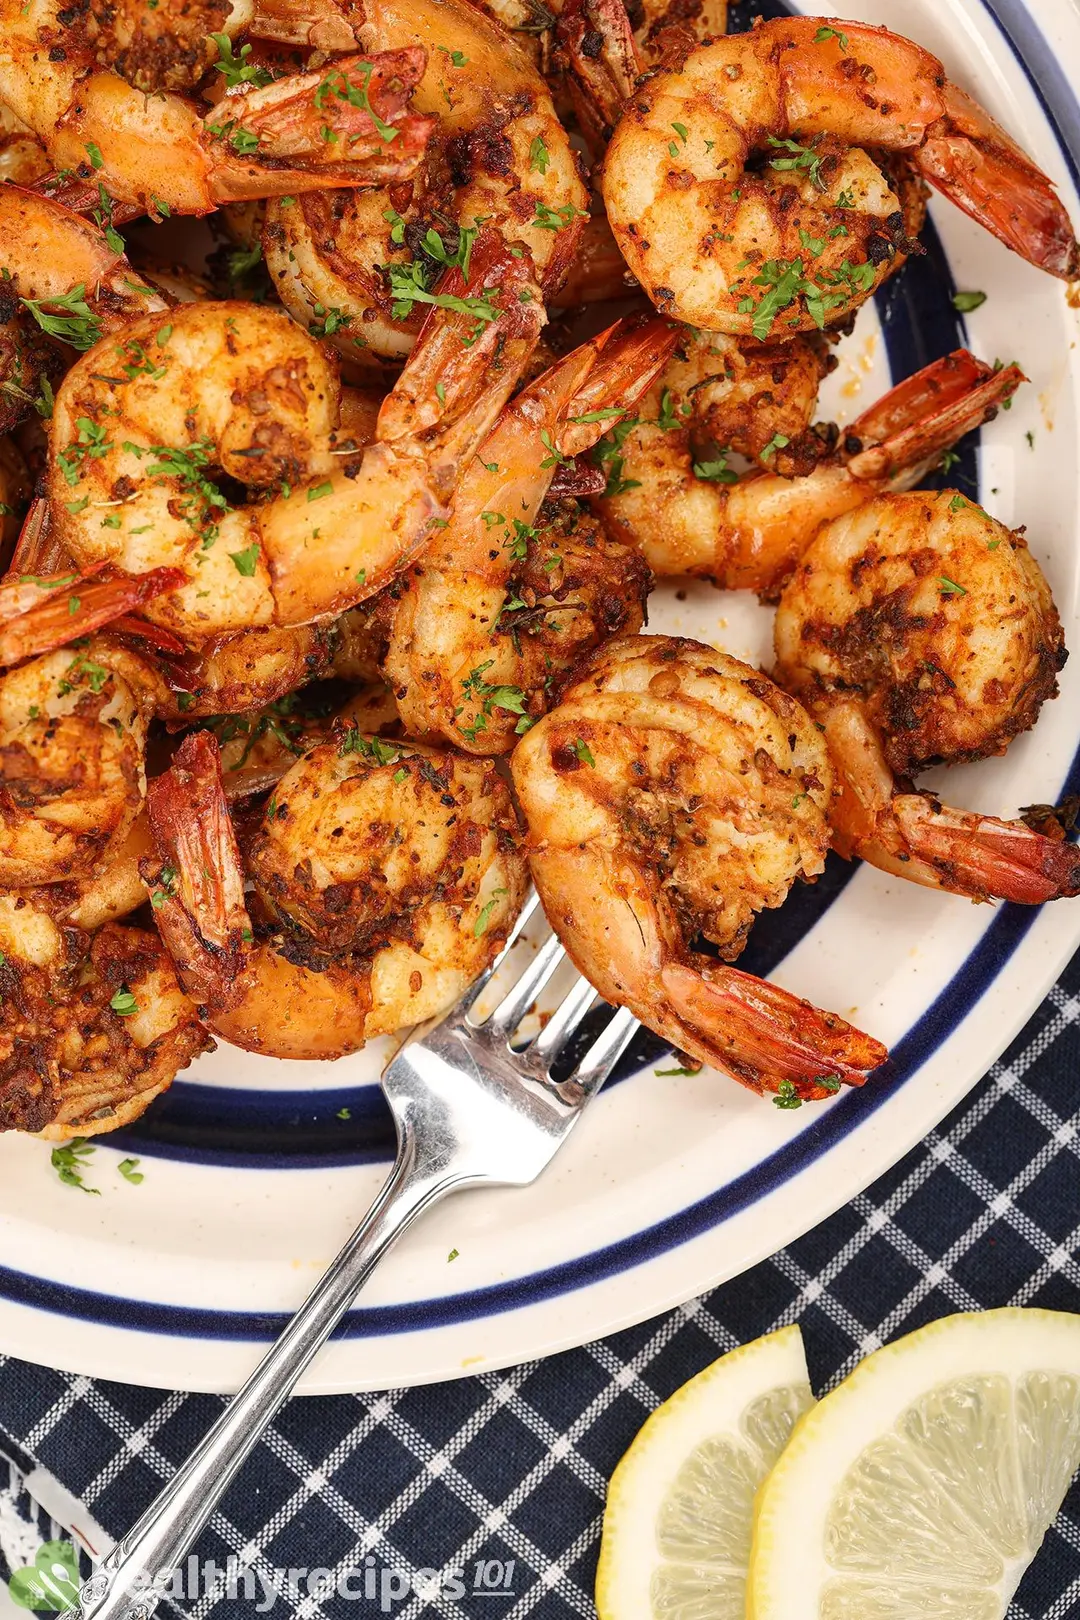 How to Store and Reheat Cooked Air Fryer Shrimp